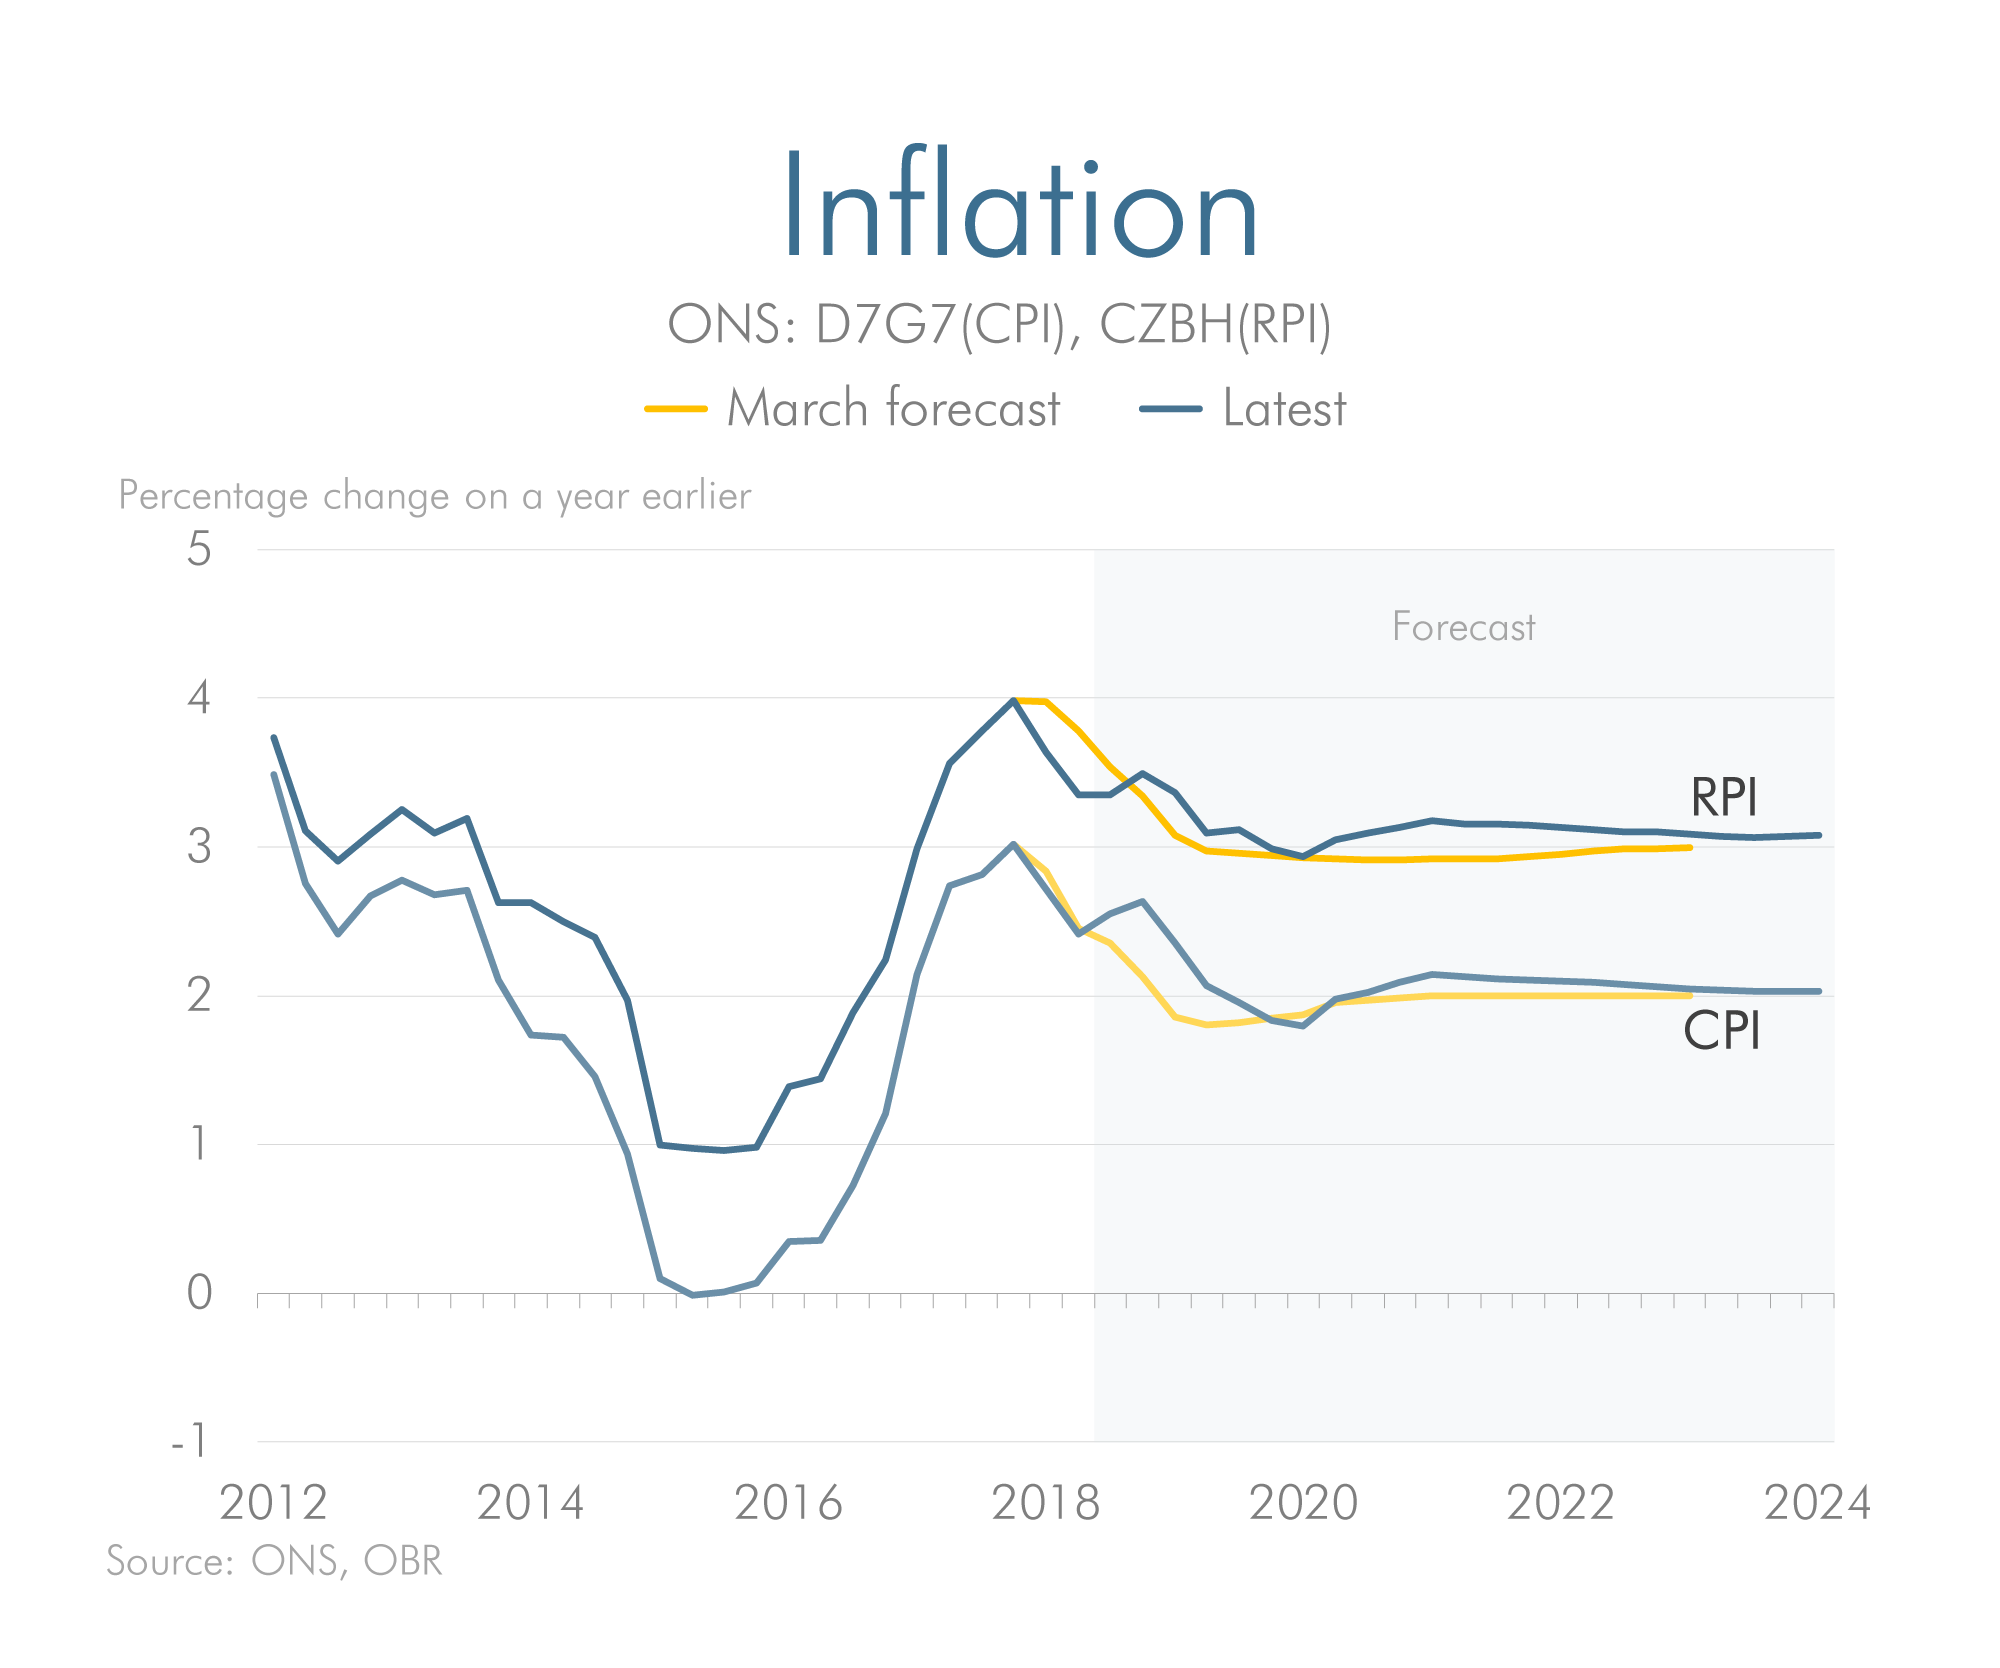 Inflation previous vs latest forecast